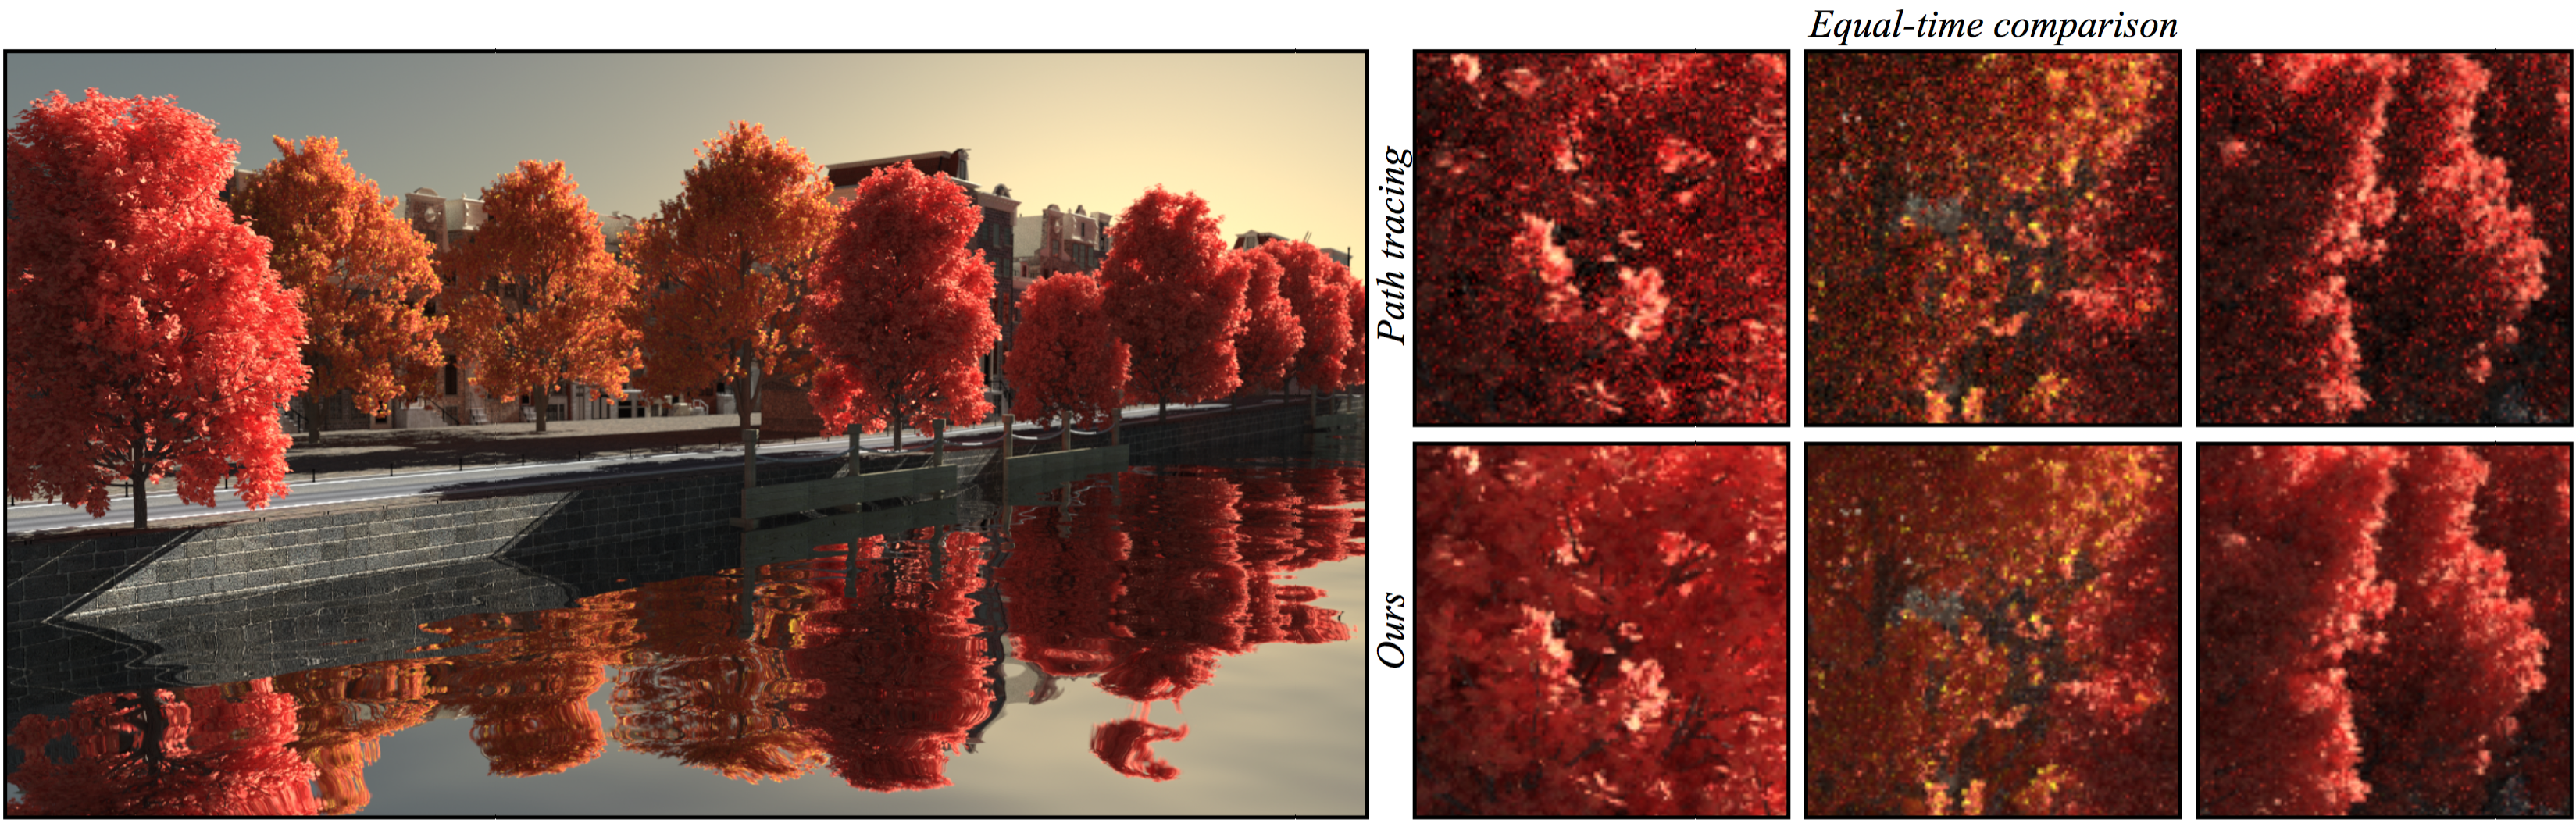 reduced-aggregate-scattering-operators-for-path-tracing-image